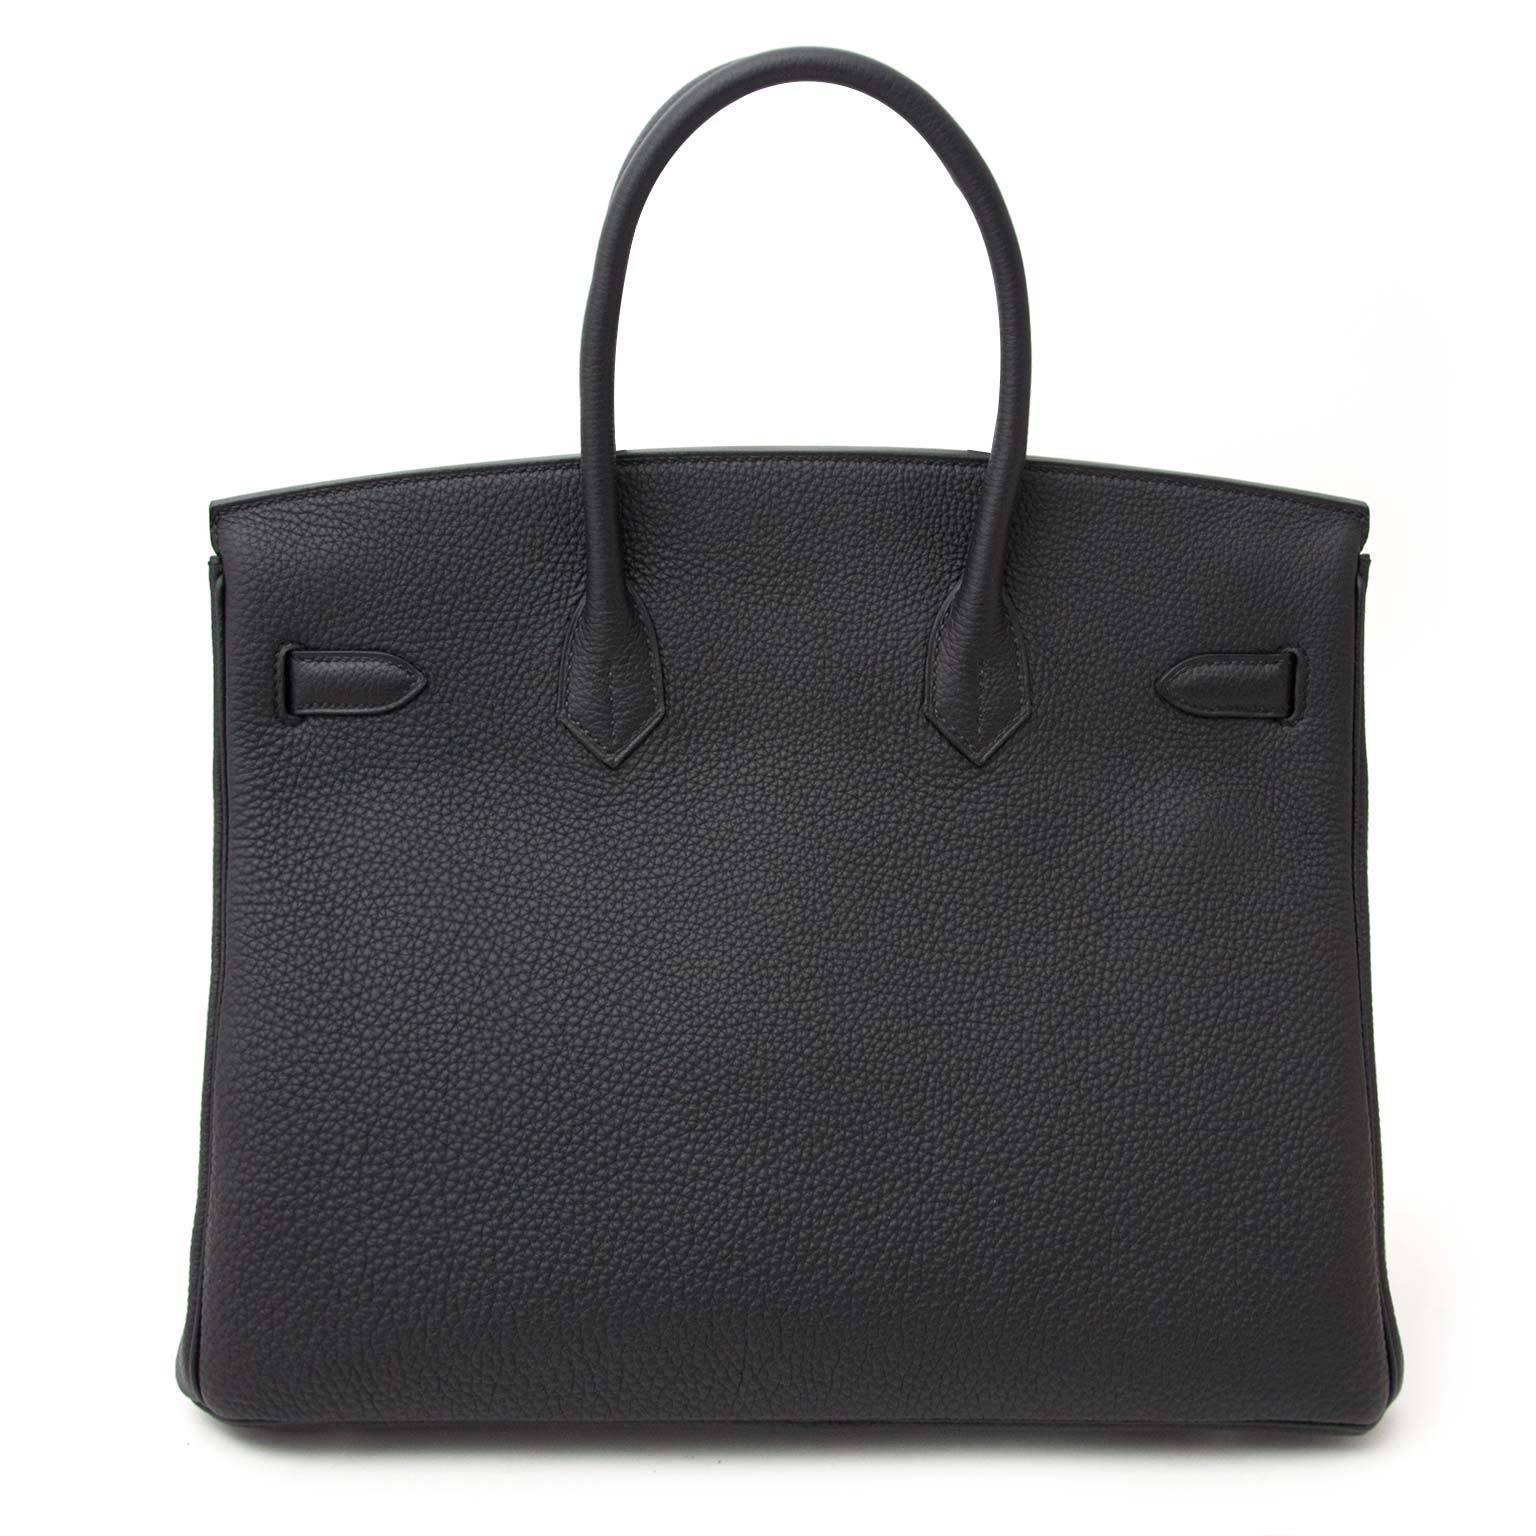 Never used!

Hermès Birkin 35 Togo Black PHW

This brand new Hermès Birkin bag is made out of togo leather. Togo is a leather type that feels grainy but very smooth, it is scratch resistant and keeps is shape well.

The palladium hardware finishes